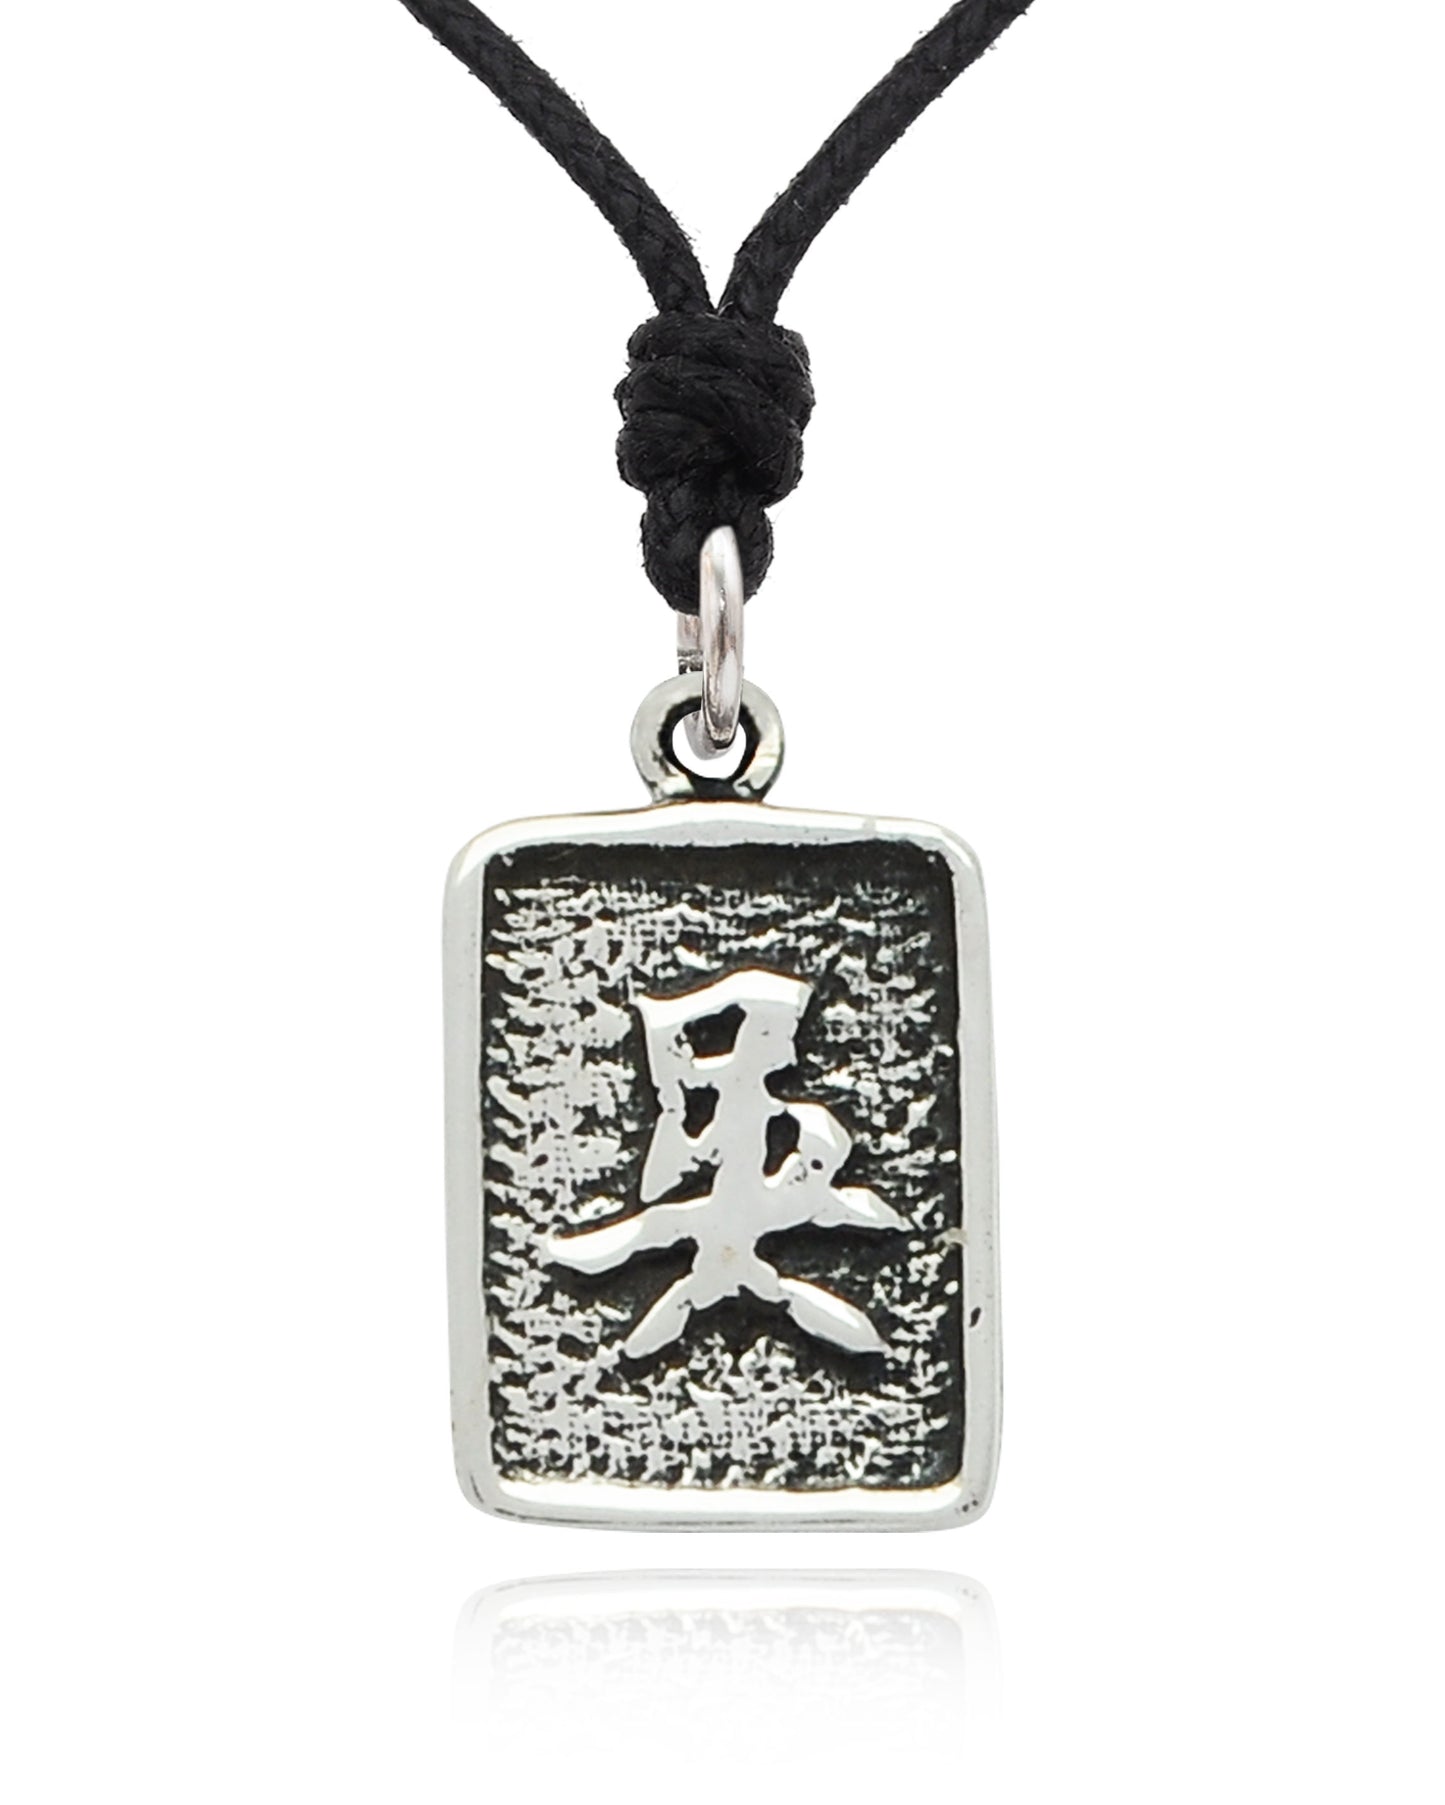 Chinese Wu Word Silver Pewter Gold Brass Charm Necklace Pendant Jewelry